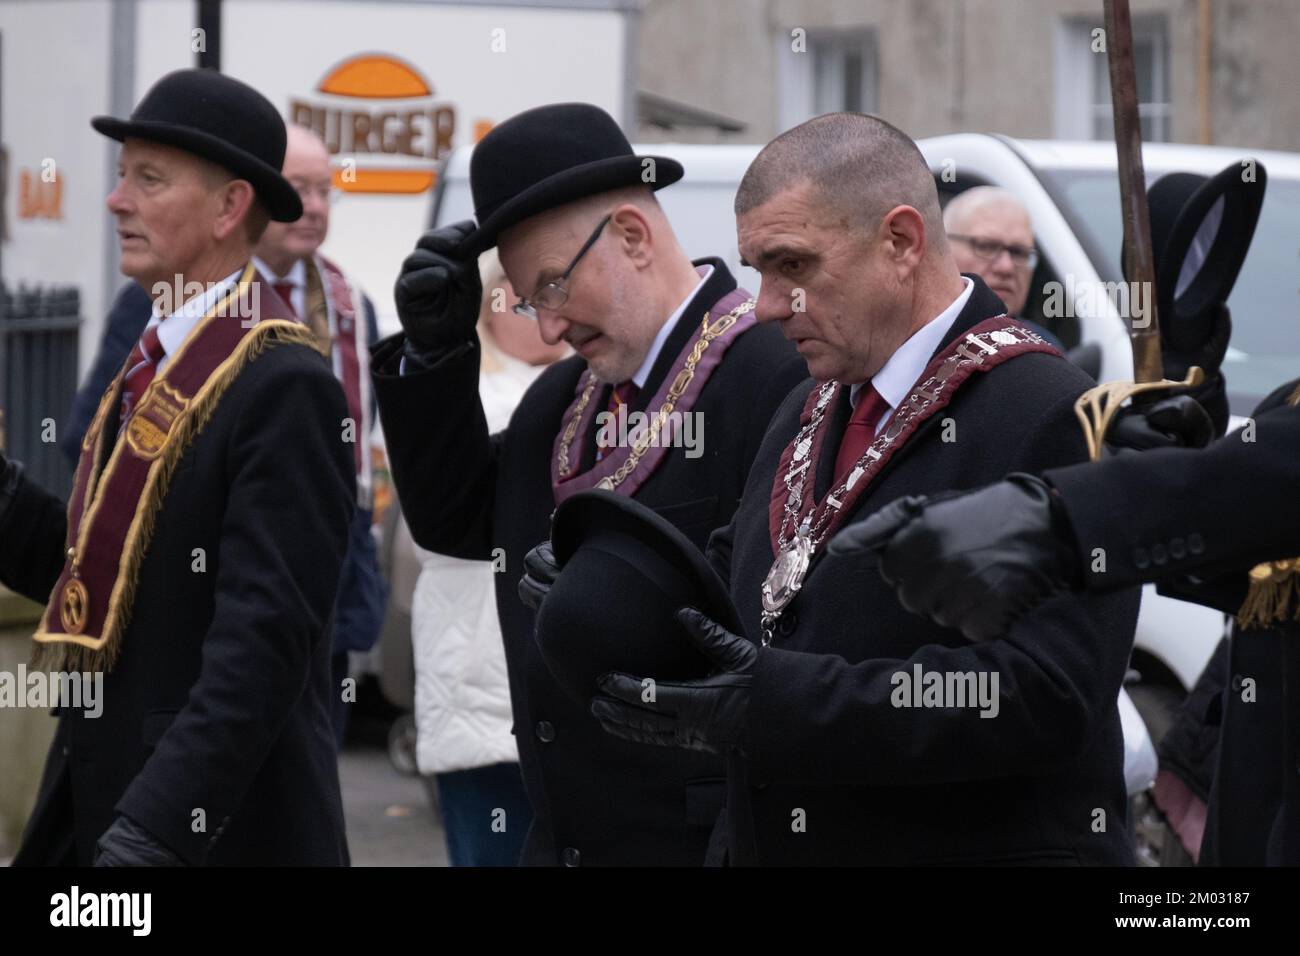 Londonderry, United Kingdom. 3 Dec, 2022. Graeme Stenhouse (right) governor of the Apprentice Boys of Derry at Shutting of the Gates 2022. Credit: Steve Nimmons/Alamy Live News Stock Photo